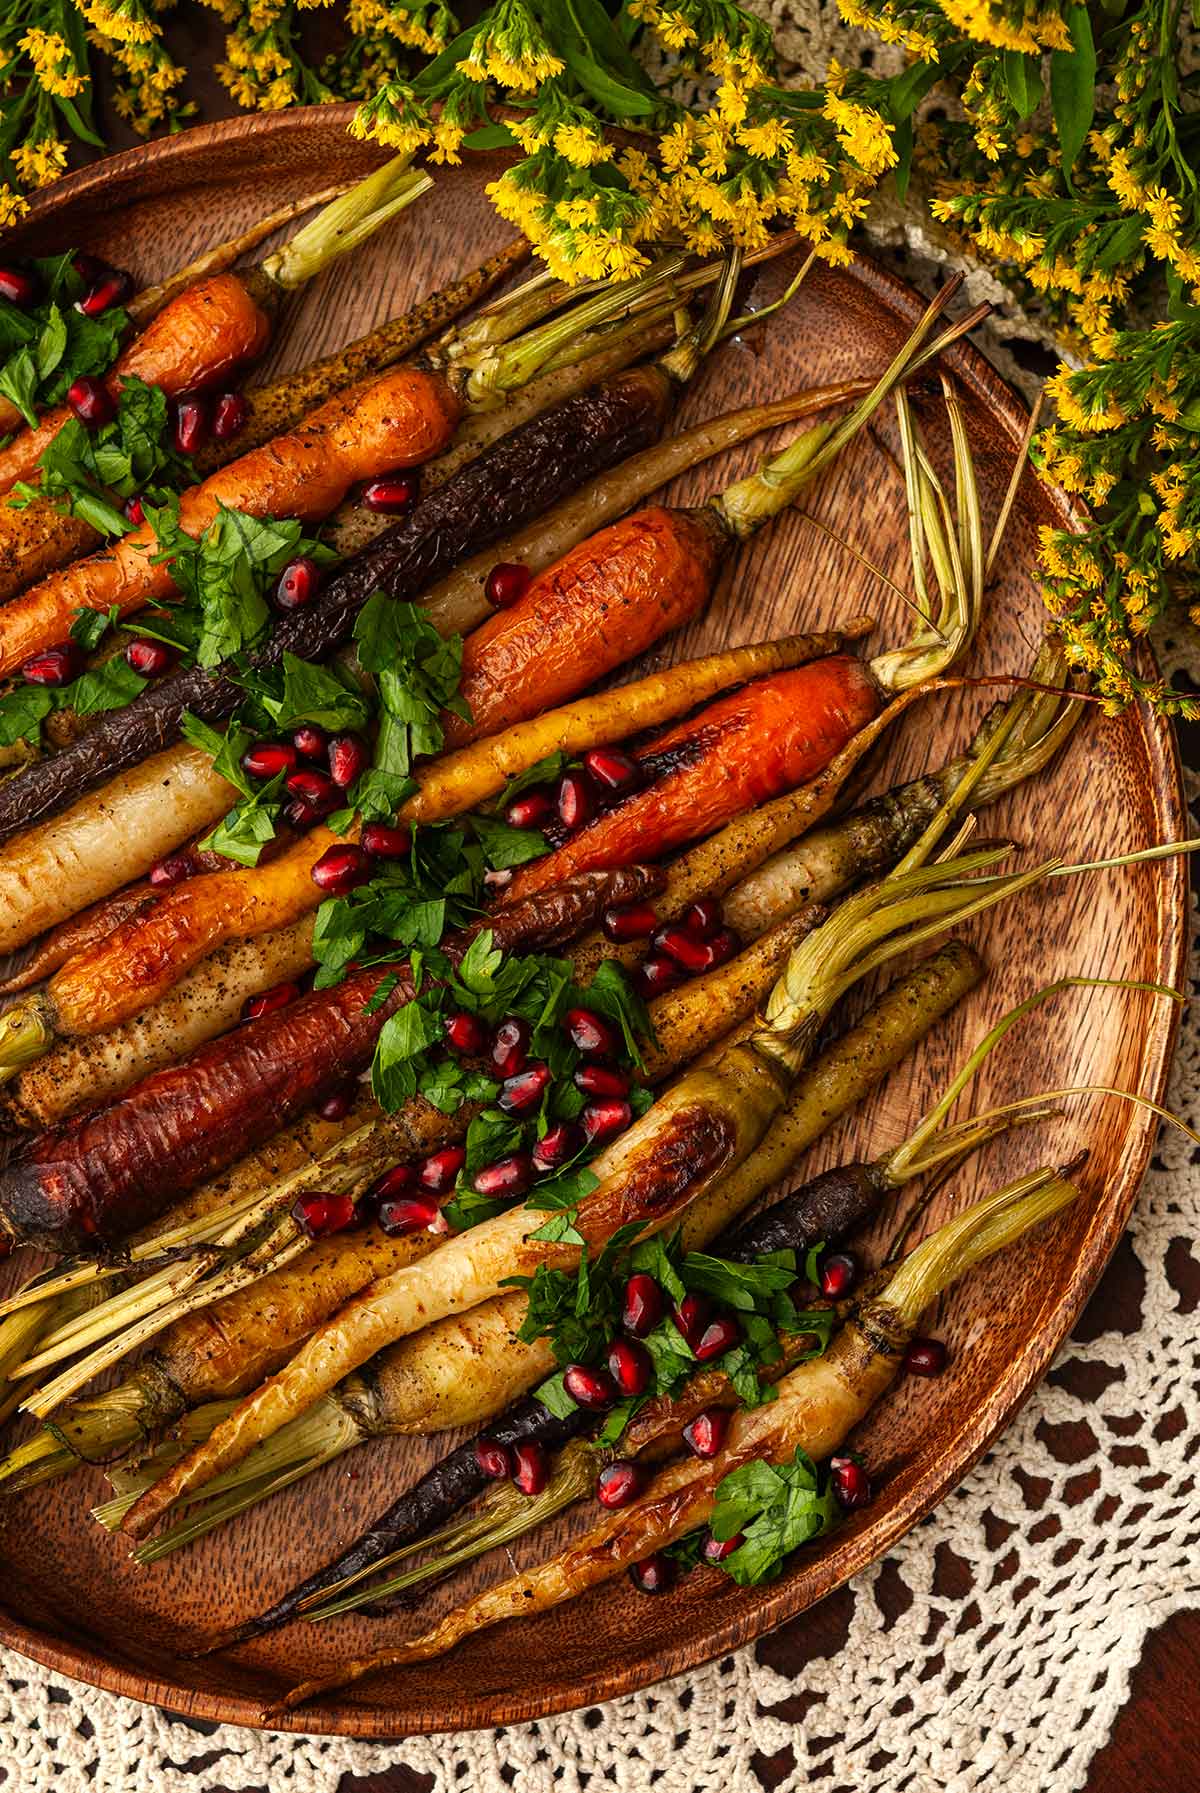 A wooden platter of roasted carrots on a lace tablecloth beside flowers..